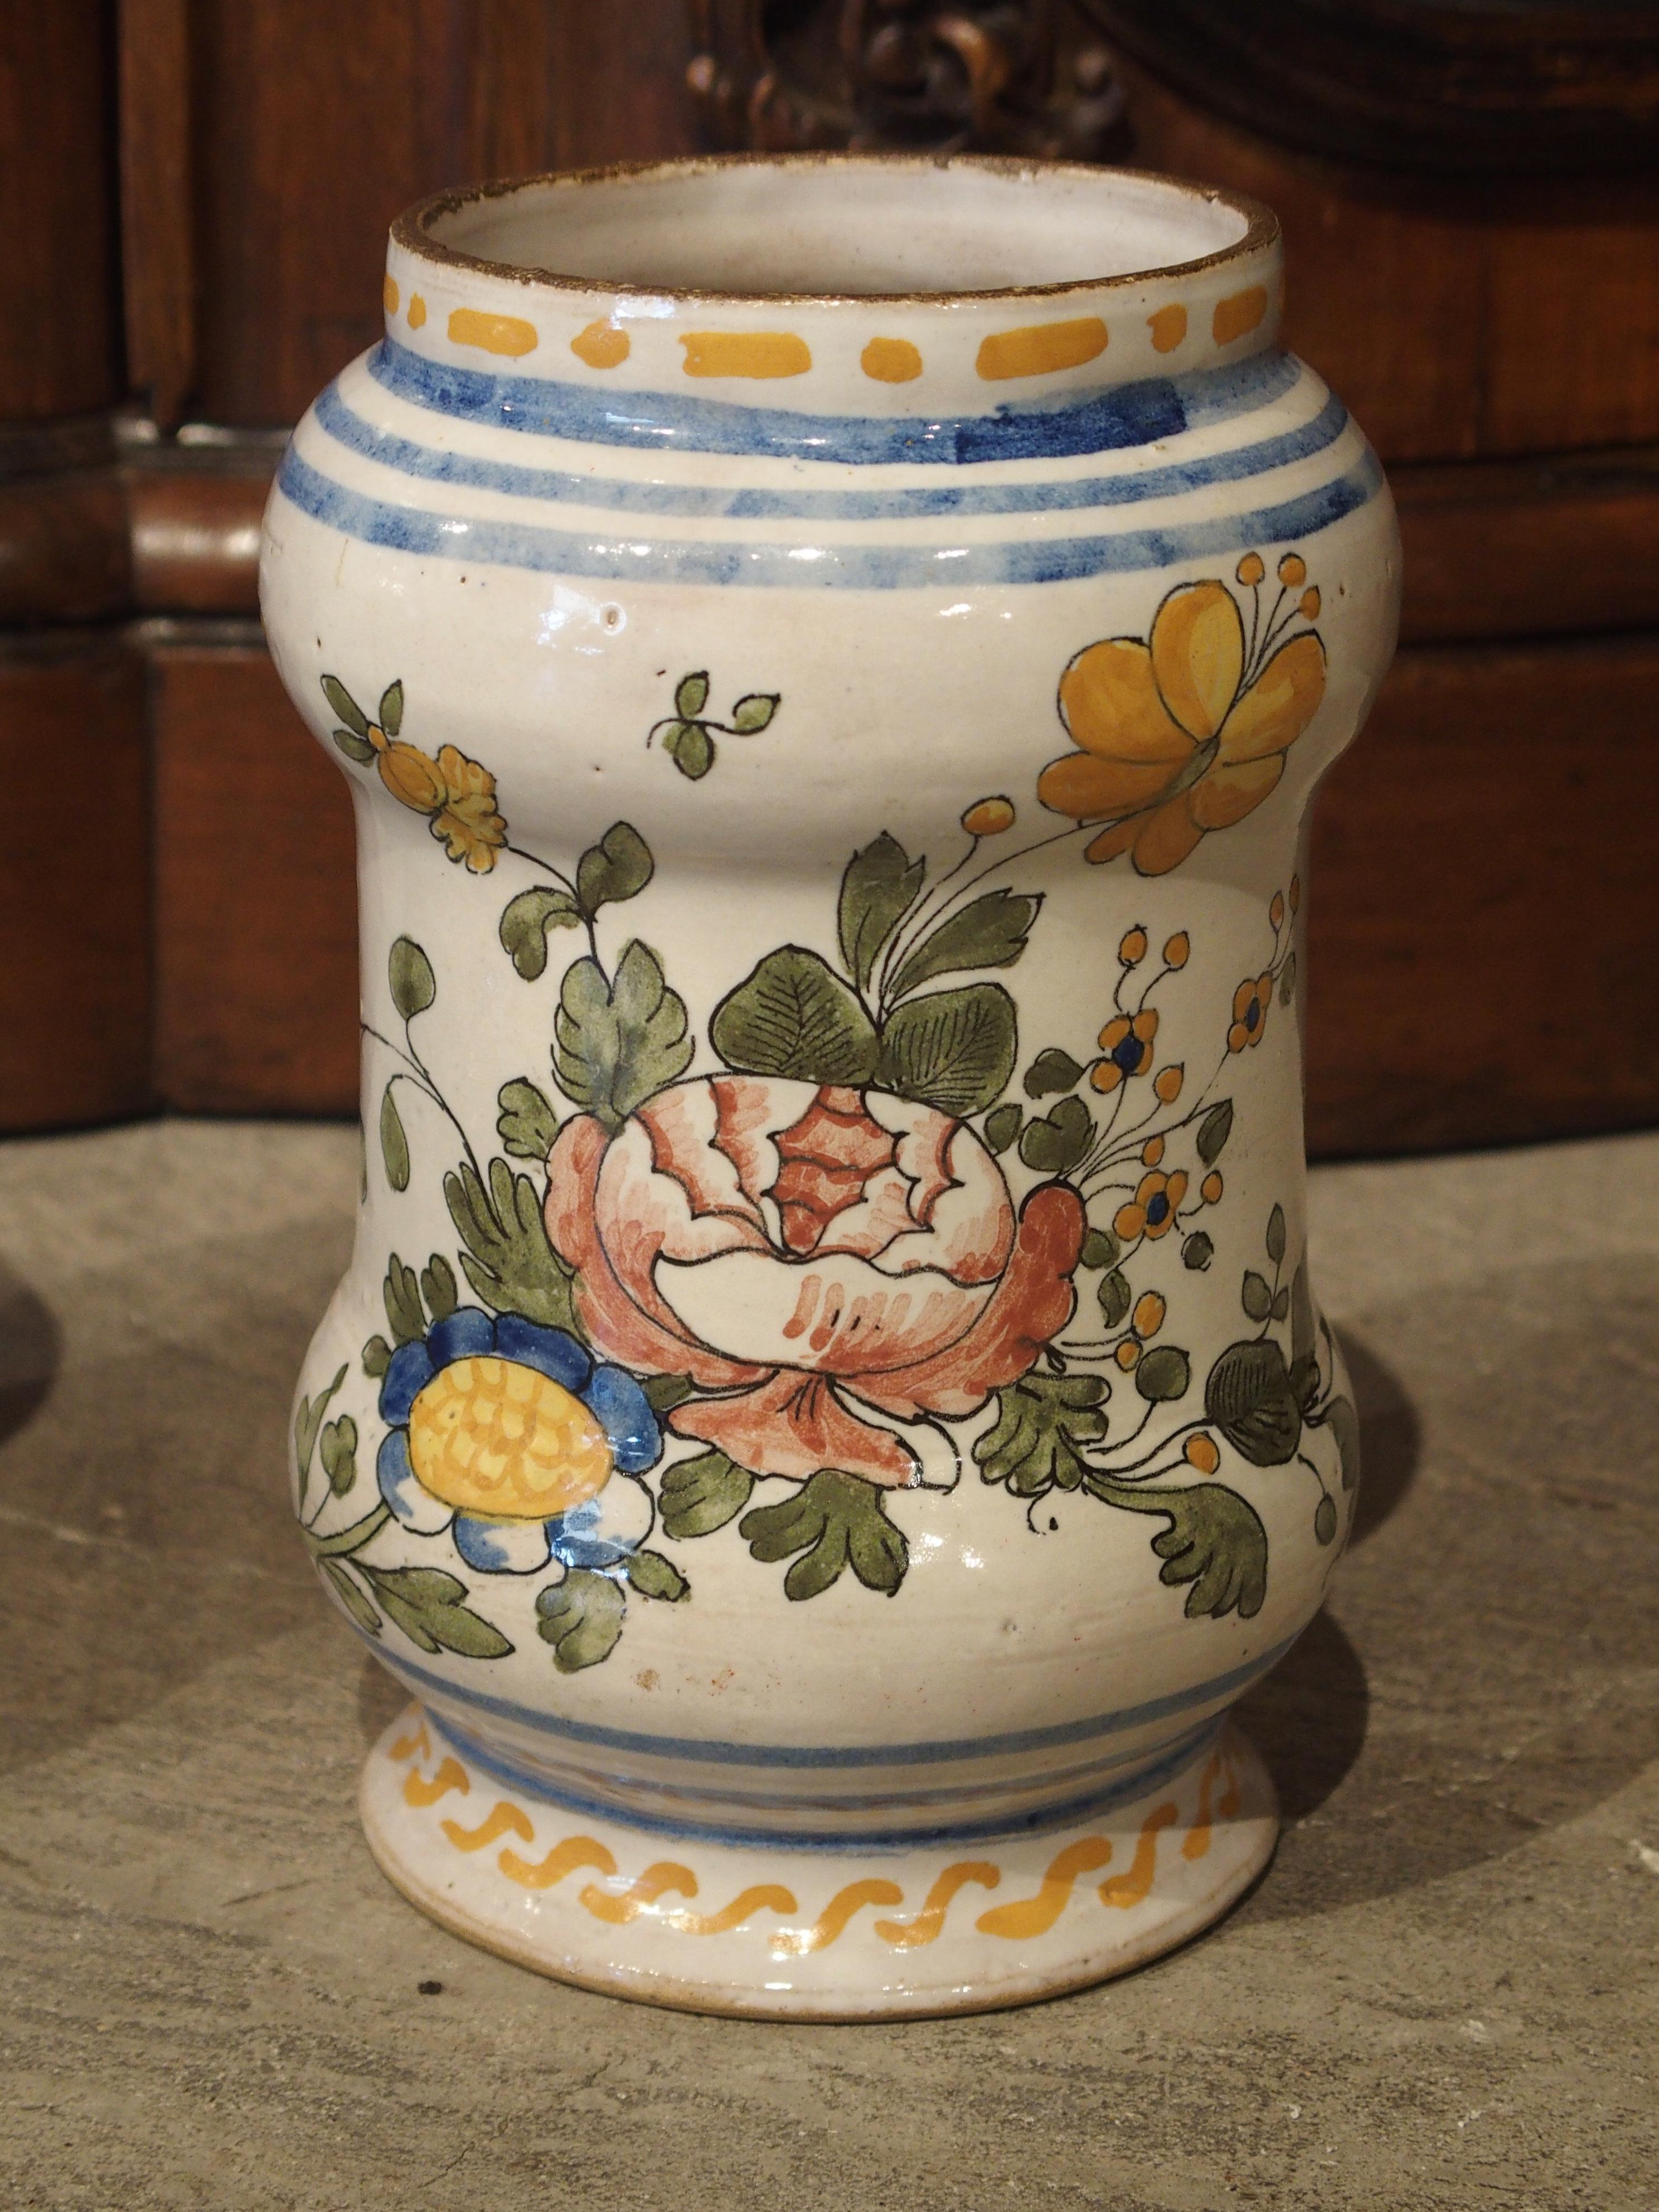 This pair of tin glazed earthenware or Italian Majolica pots were originally used for holding apothecaries’ ointments or dry drugs. Albarello is the Italian name of this type of majolica vessel. The pair shown below are late 19th century, and they